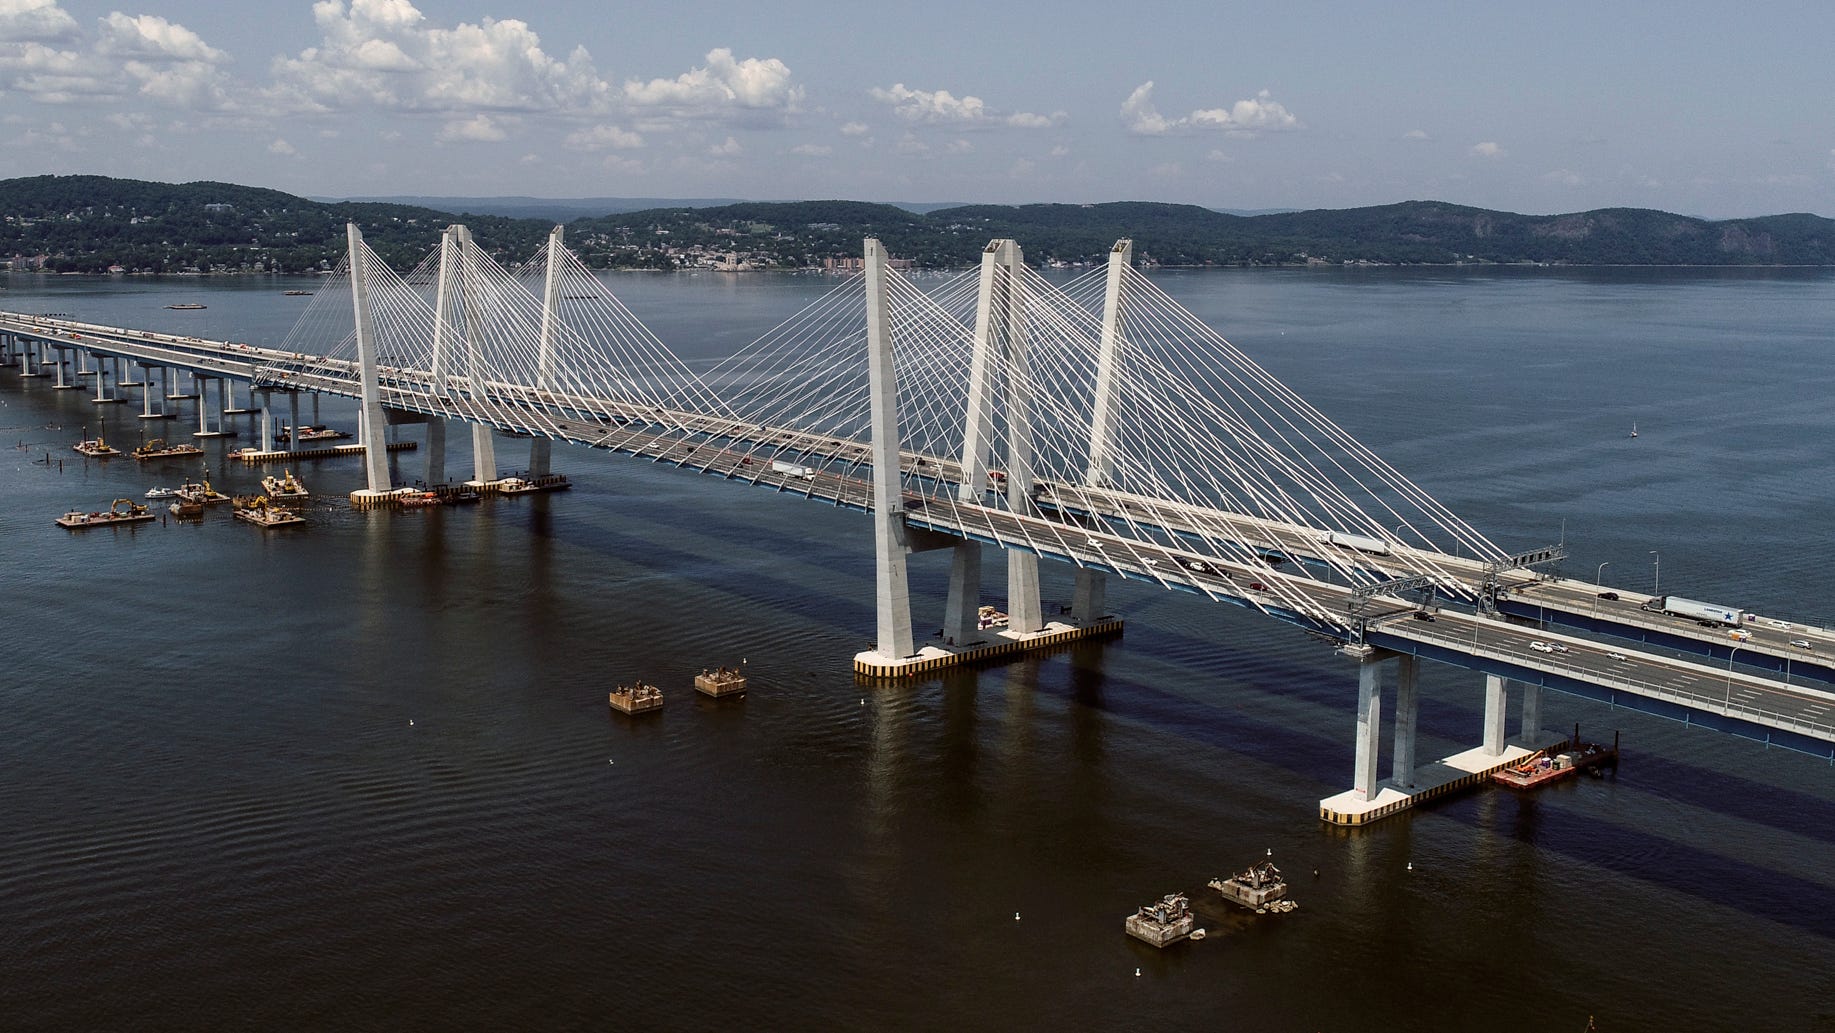 Mario Cuomo Bridge toll: Thruway proposes toll for former Tappan Zee